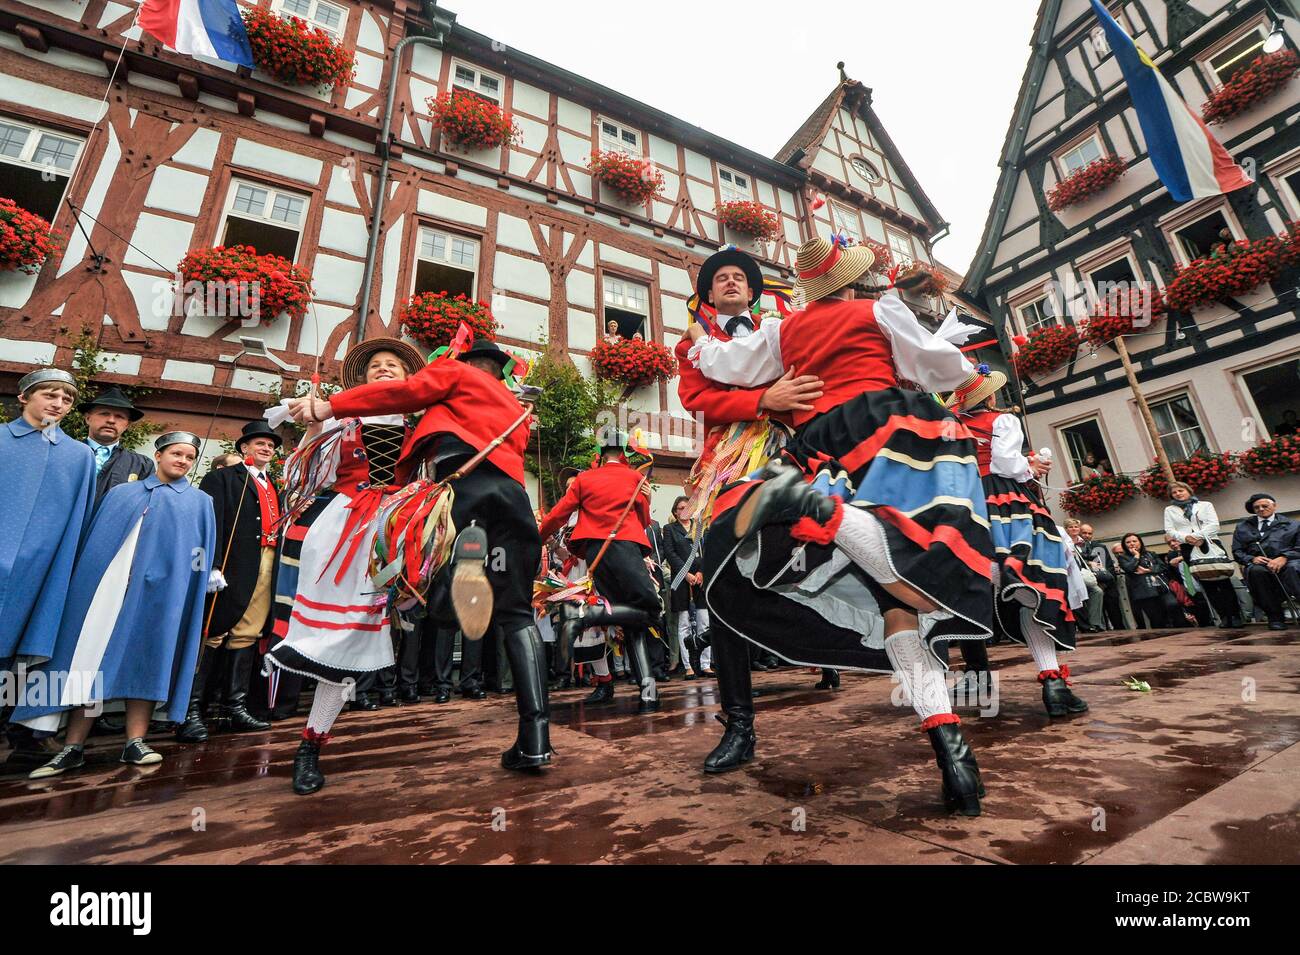 Germany, Bad Urach. The JShepherds Dance in traditional costumes at the 'Run of the shepherds' Festival (Schaeferlauf)  is one of the highlights Stock Photo